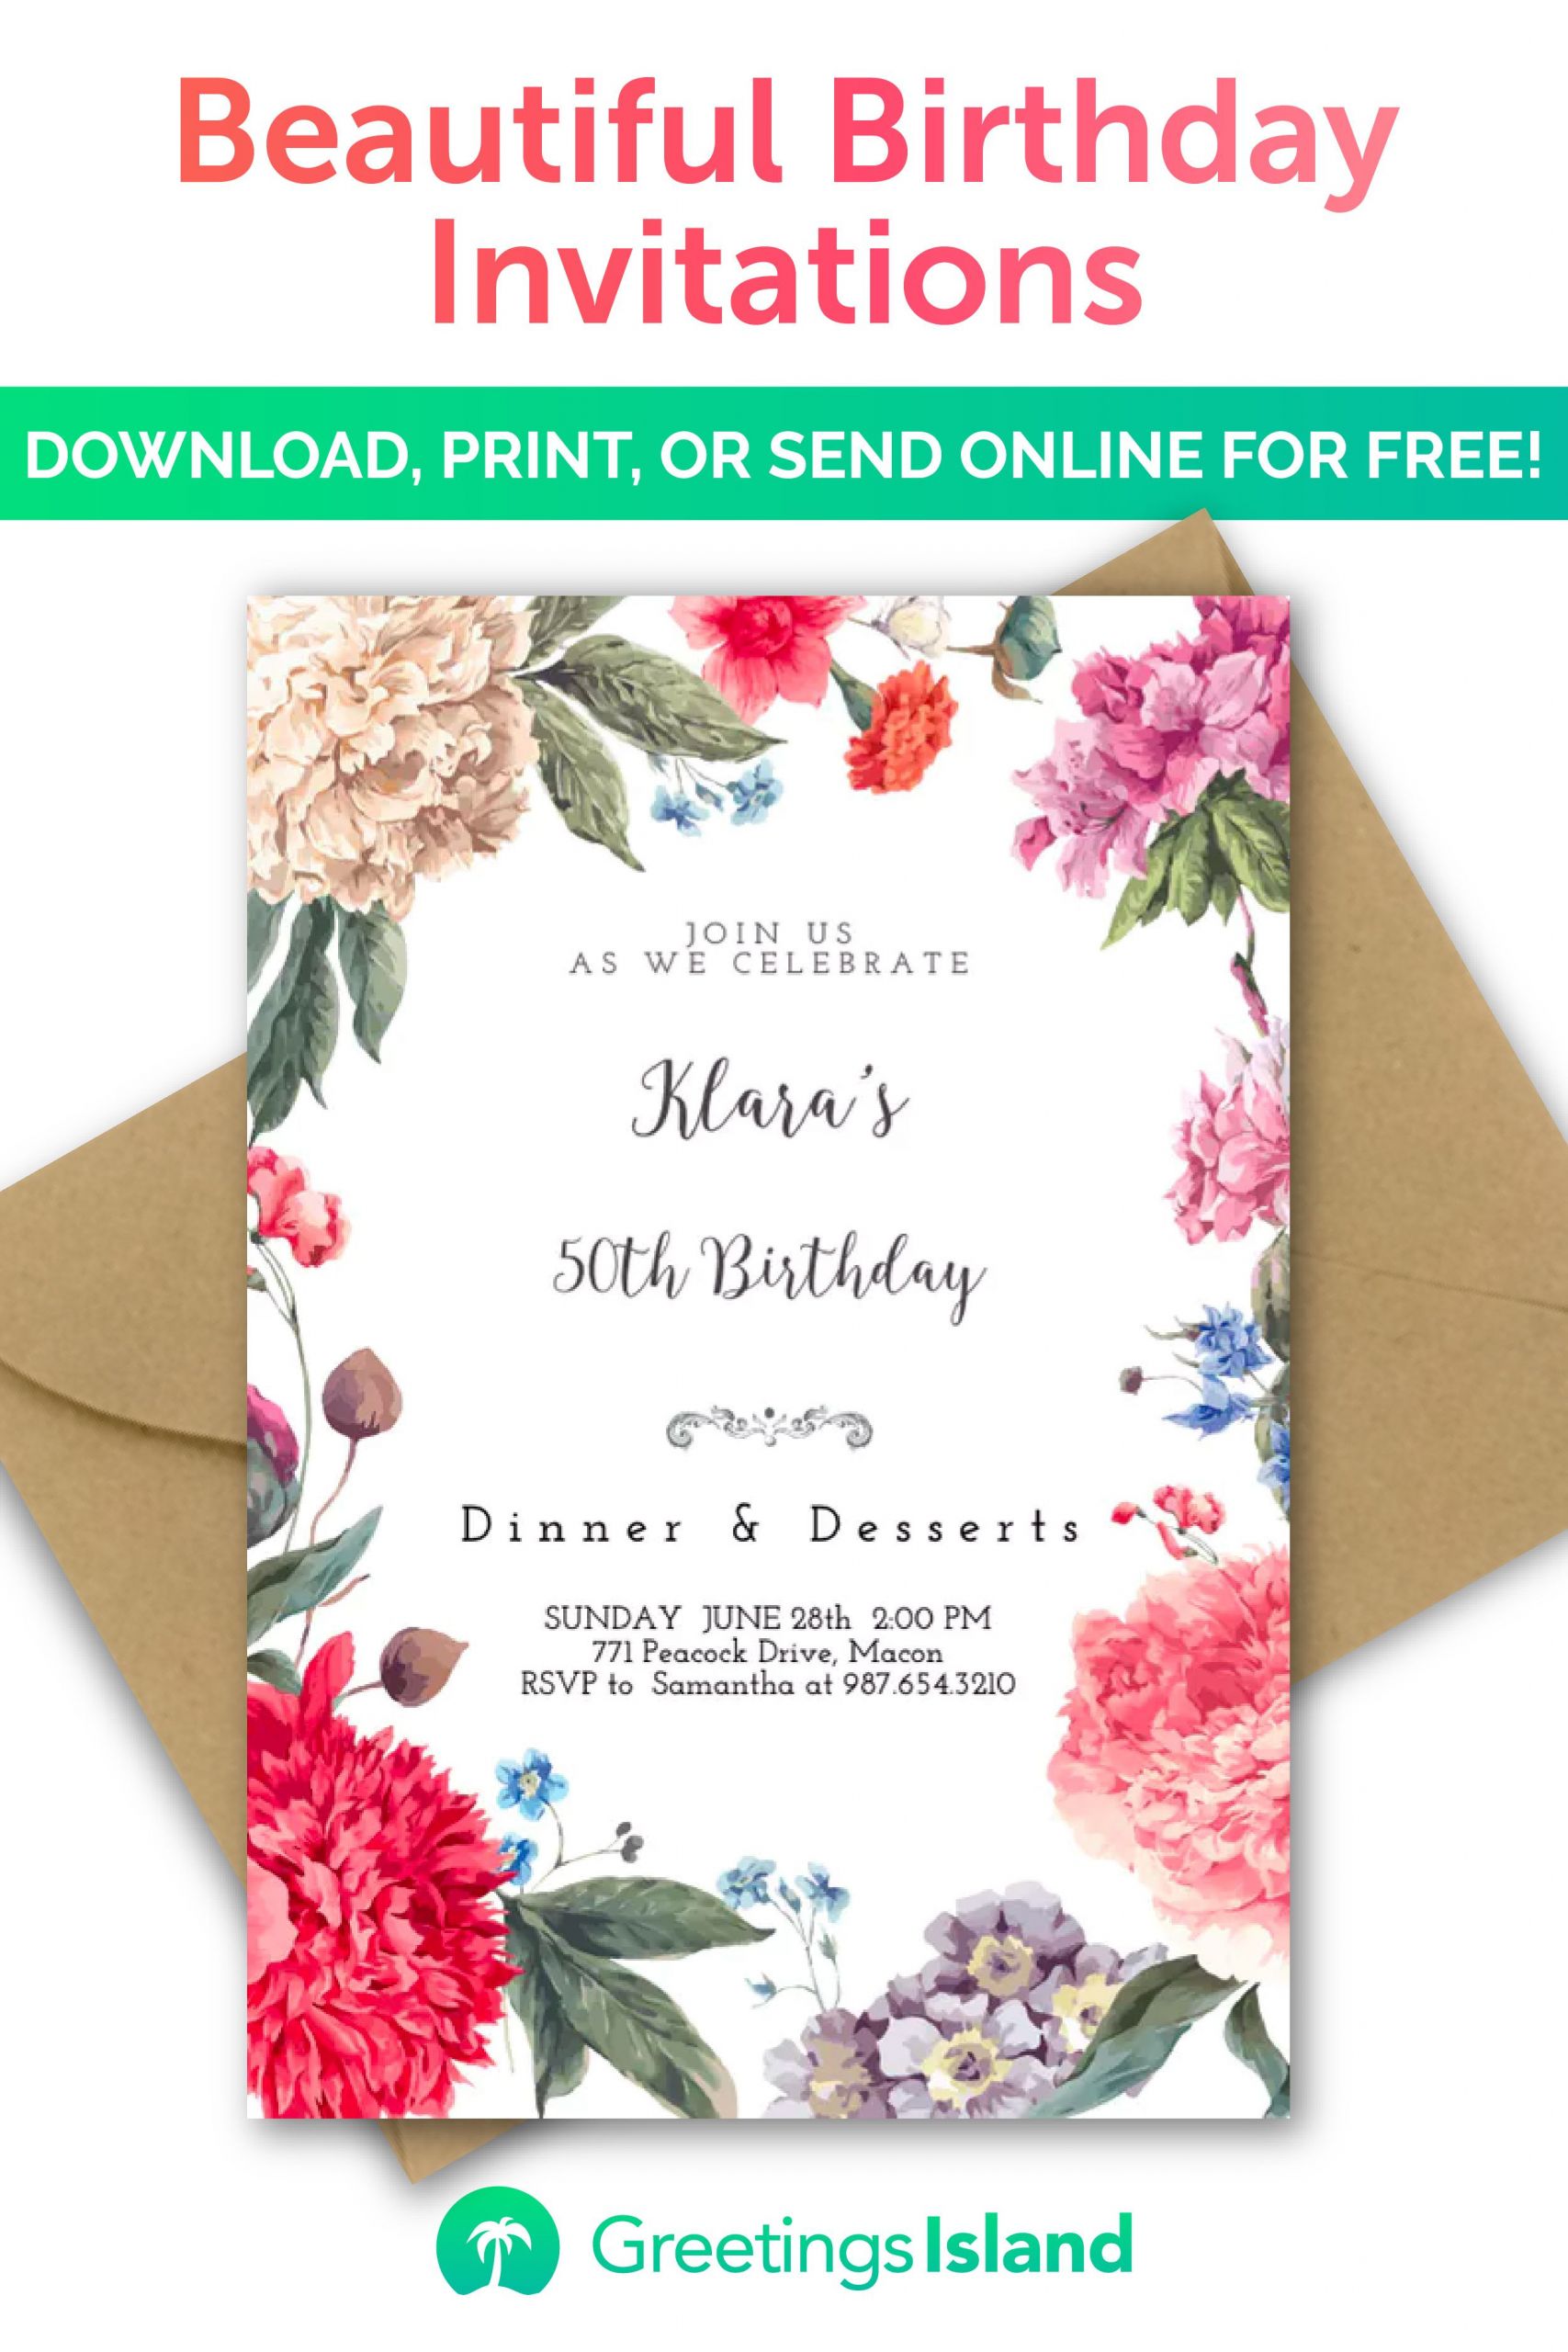 Make A Birthday Invitation
 Create your own birthday invitation in minutes Download